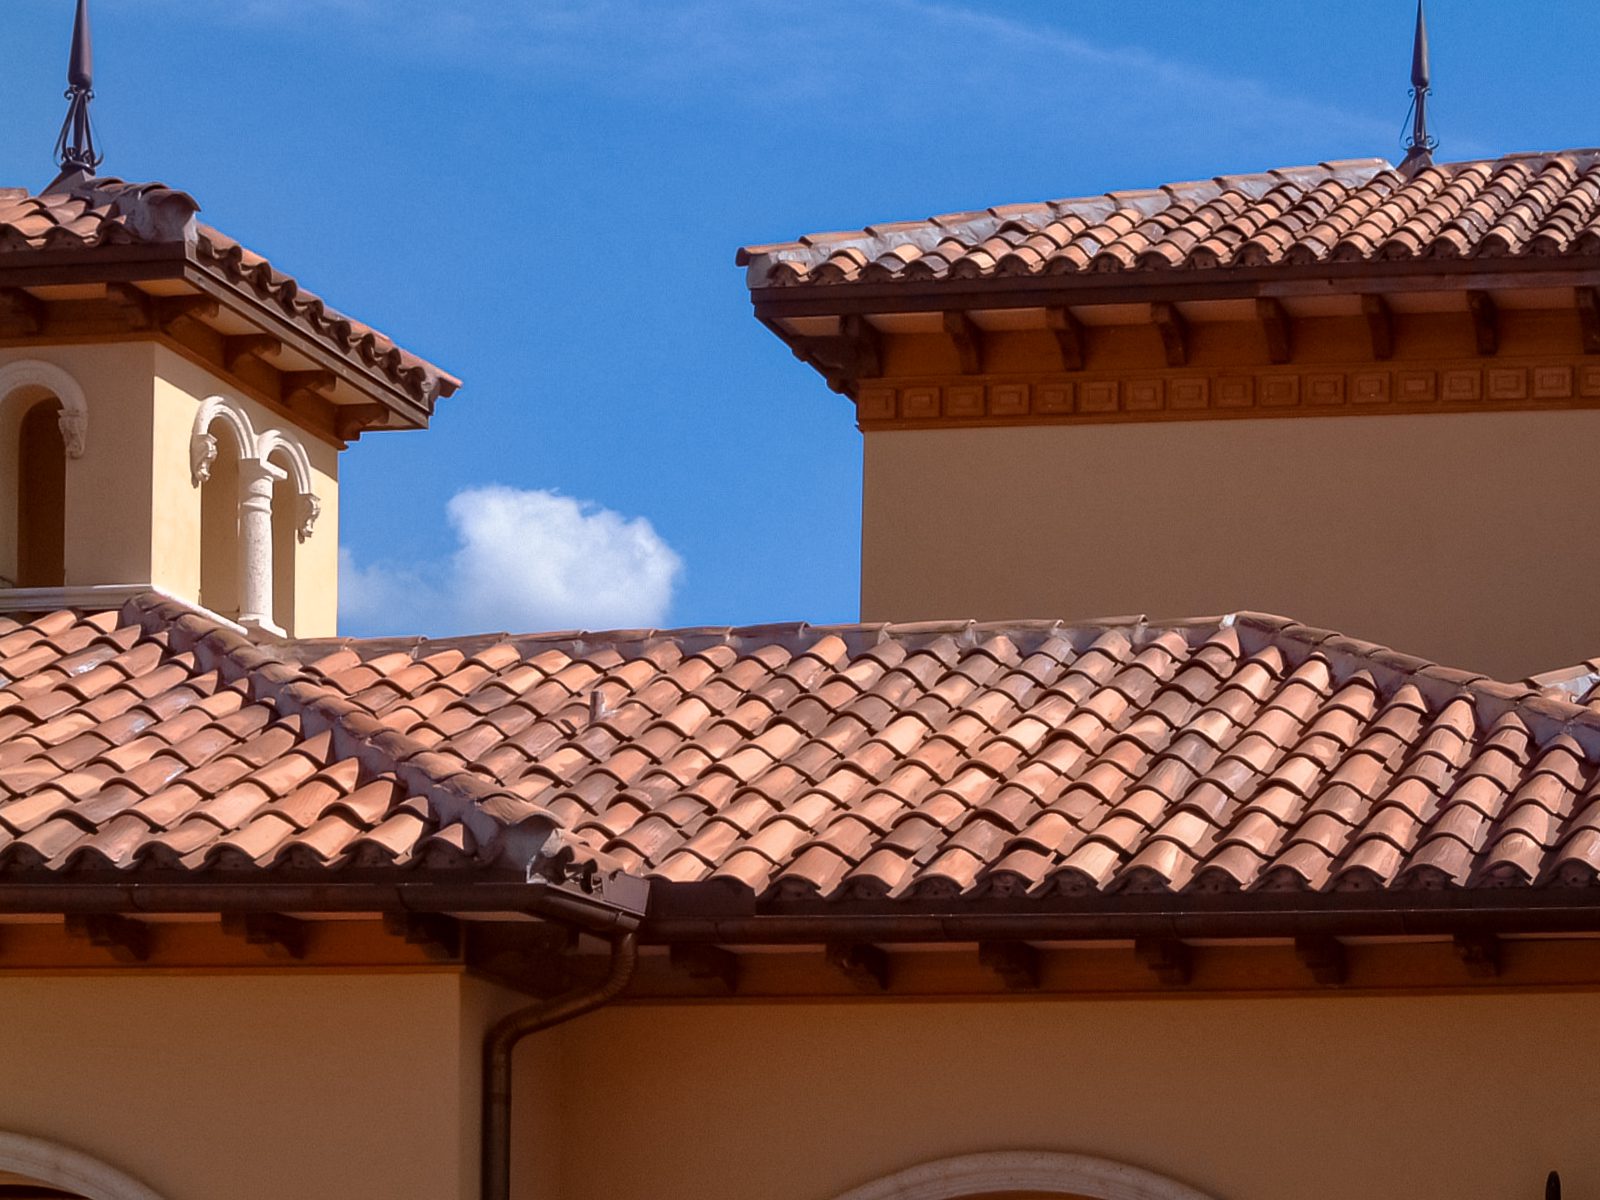 A roof with tan tile and a blue sky.